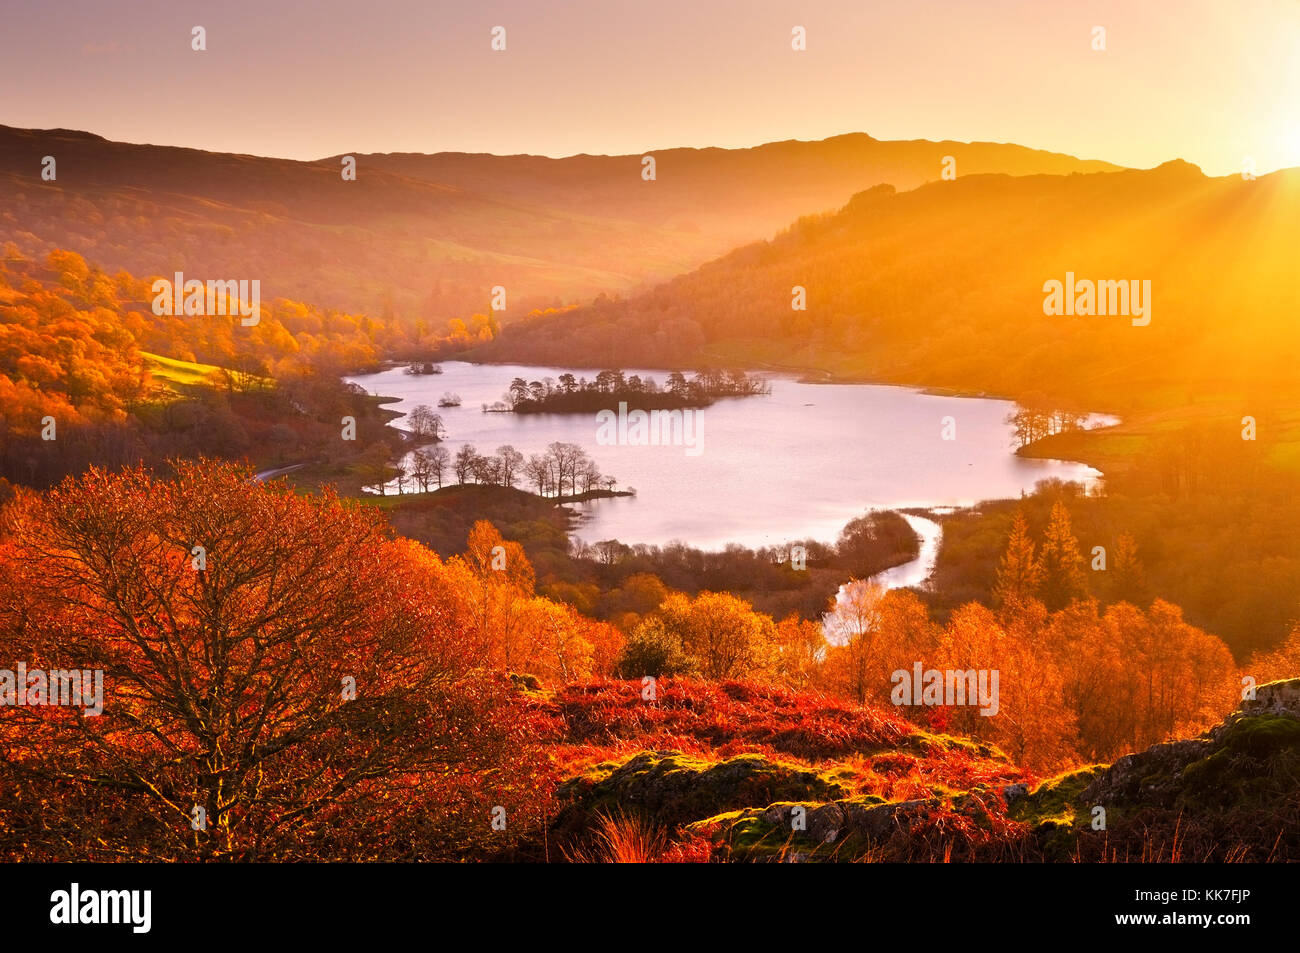 Rydal Water at sunrise, Lake District, UK.  Elevated view overlooking the beautiful lake and autumn landscape from White Moss Common. Stock Photo